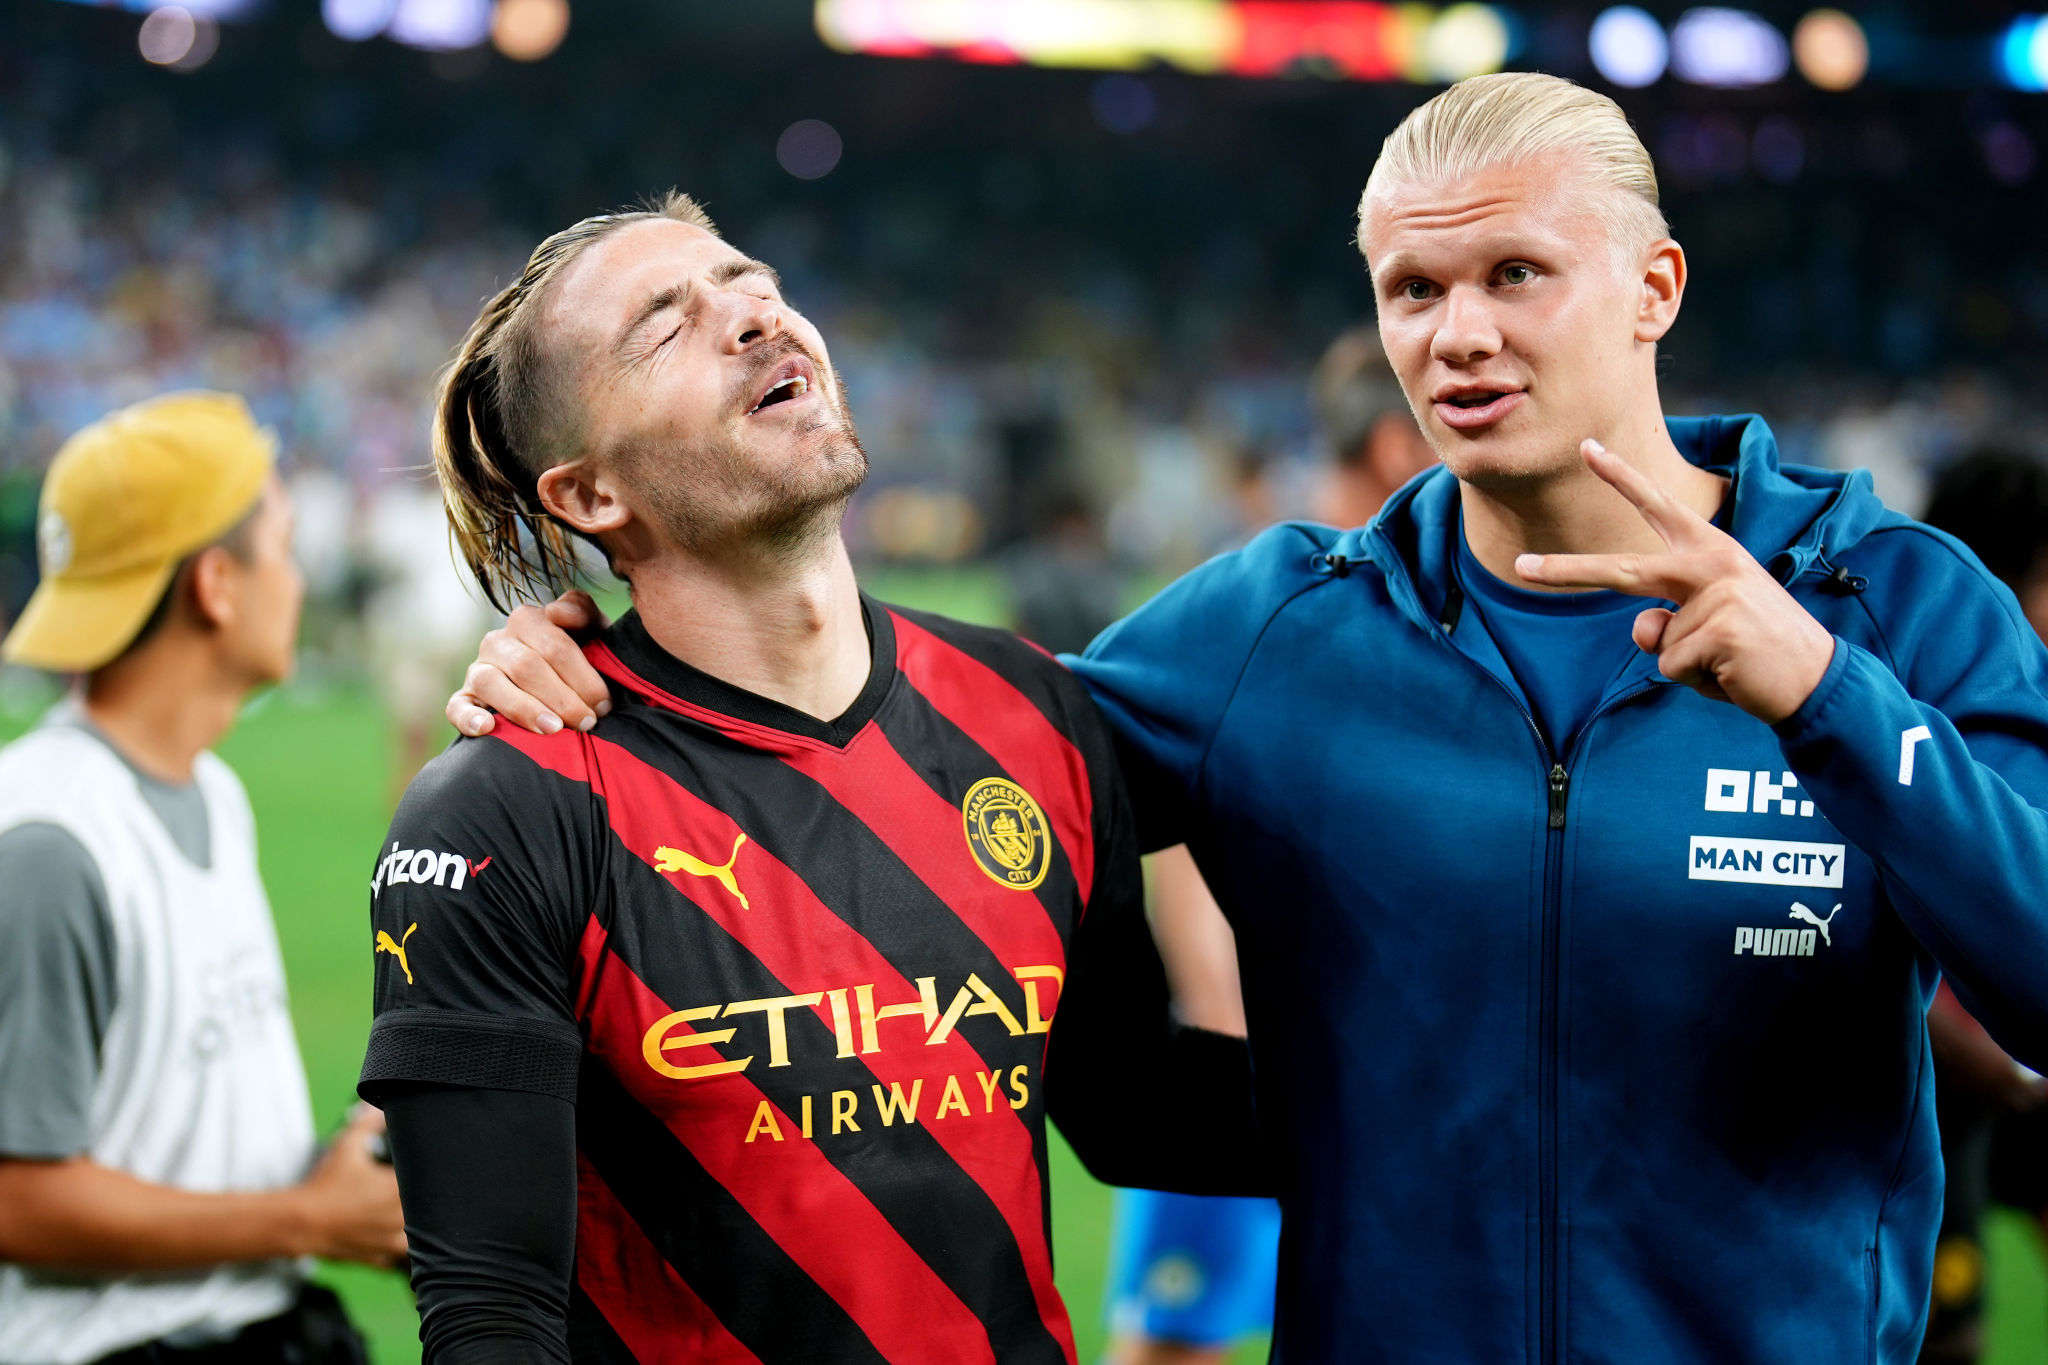 Premier League 2022-23: Erling Haaland and Co. eager to break Man City's Champions League curse, Check out Manchester City 2022-23 season preview, fixtures, transfers, key players and more